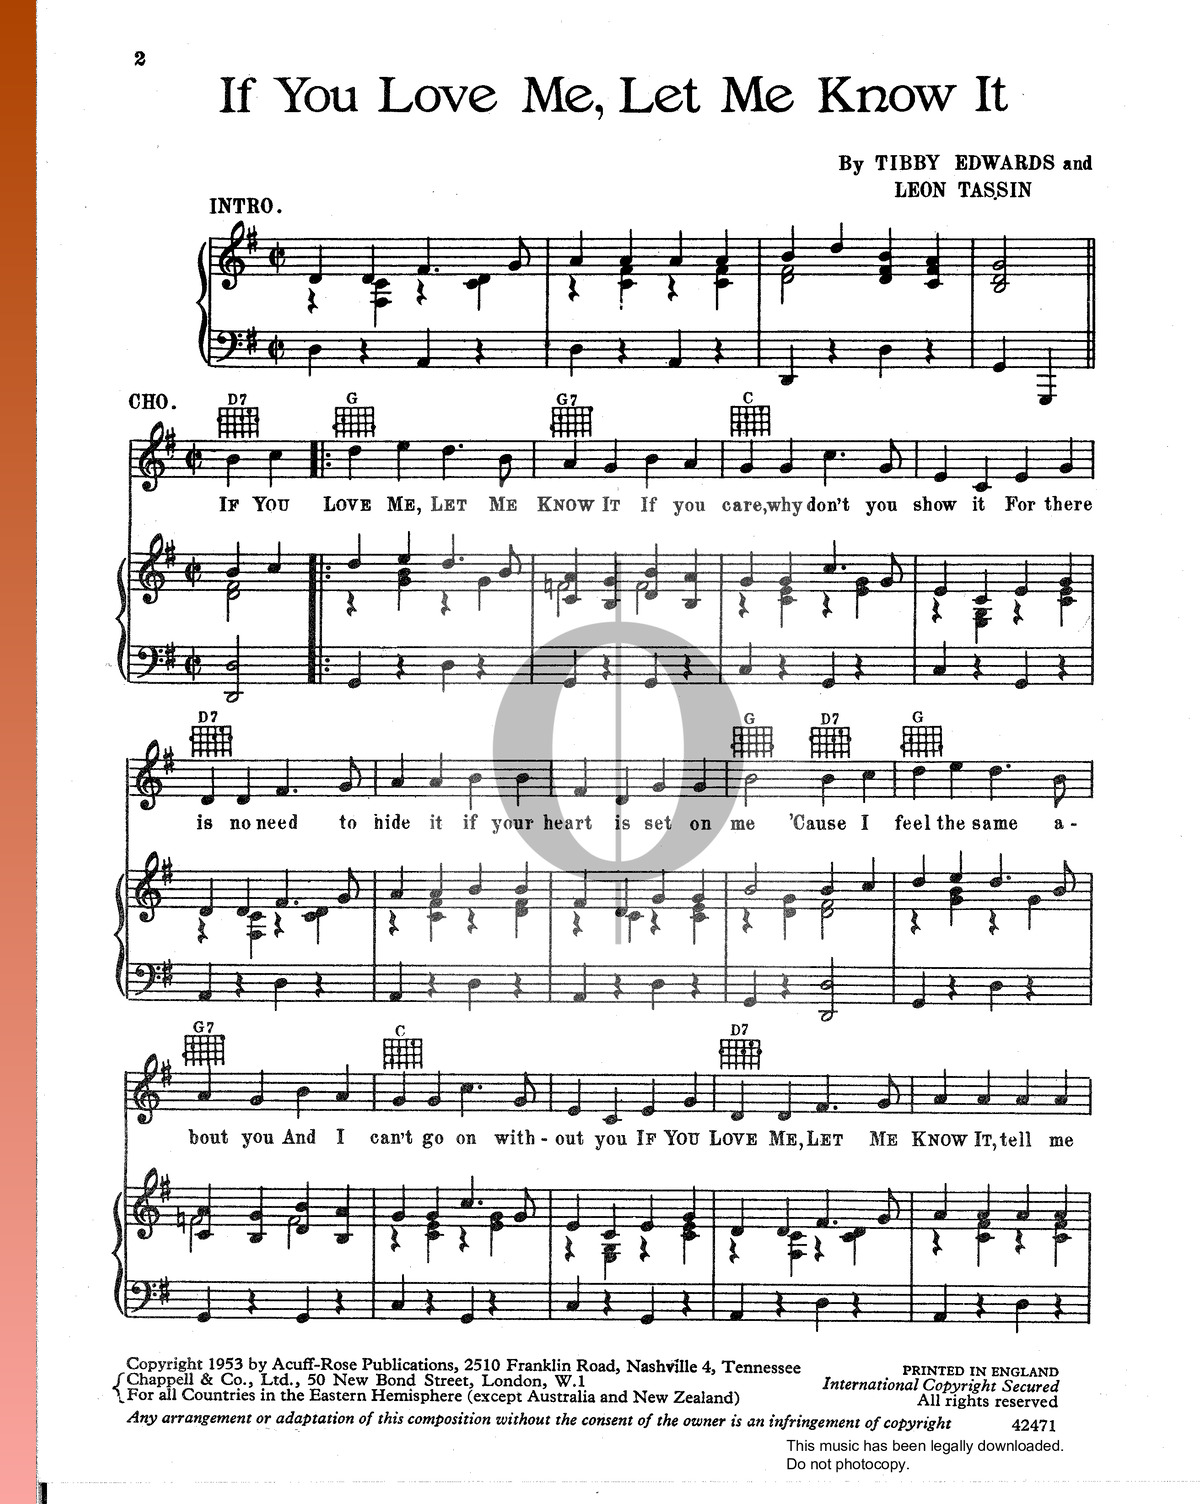 If You Love Me, Let Me Know It Sheet Music (Piano, Guitar, Voice) - OKTAV